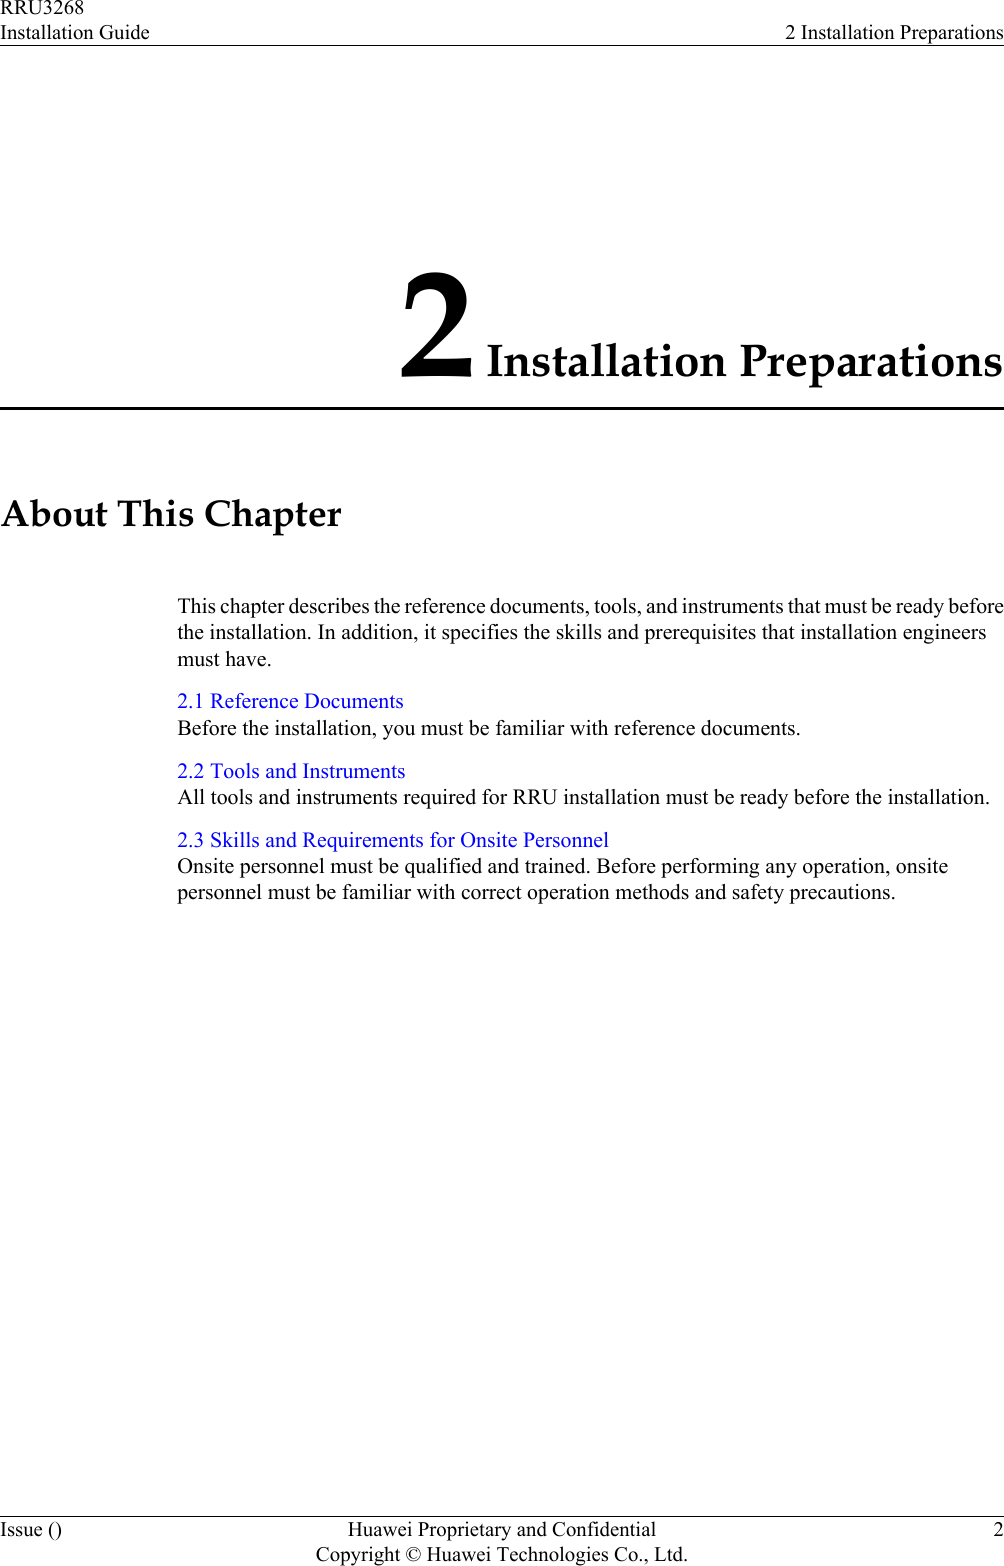 2 Installation PreparationsAbout This ChapterThis chapter describes the reference documents, tools, and instruments that must be ready beforethe installation. In addition, it specifies the skills and prerequisites that installation engineersmust have.2.1 Reference DocumentsBefore the installation, you must be familiar with reference documents.2.2 Tools and InstrumentsAll tools and instruments required for RRU installation must be ready before the installation.2.3 Skills and Requirements for Onsite PersonnelOnsite personnel must be qualified and trained. Before performing any operation, onsitepersonnel must be familiar with correct operation methods and safety precautions.RRU3268Installation Guide 2 Installation PreparationsIssue () Huawei Proprietary and ConfidentialCopyright © Huawei Technologies Co., Ltd.2